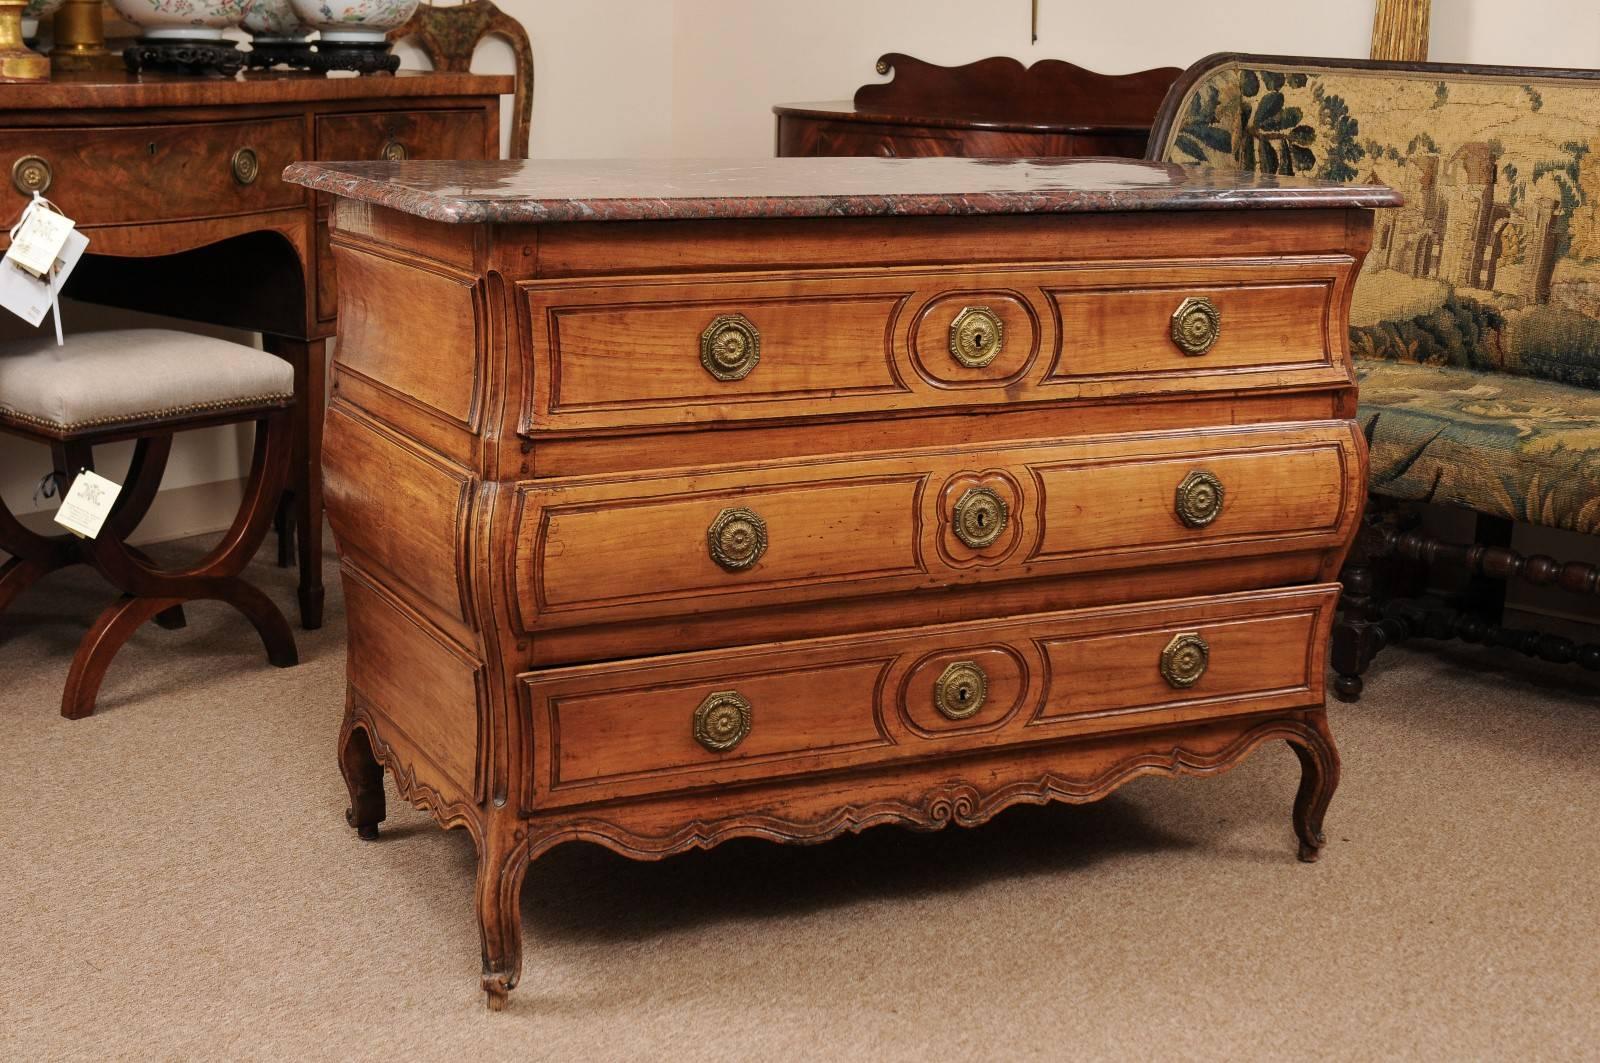 Louis XV bombe form commode in fruitwood with three (3) drawers, cabriole feet, and red marble top, France, circa 1750.